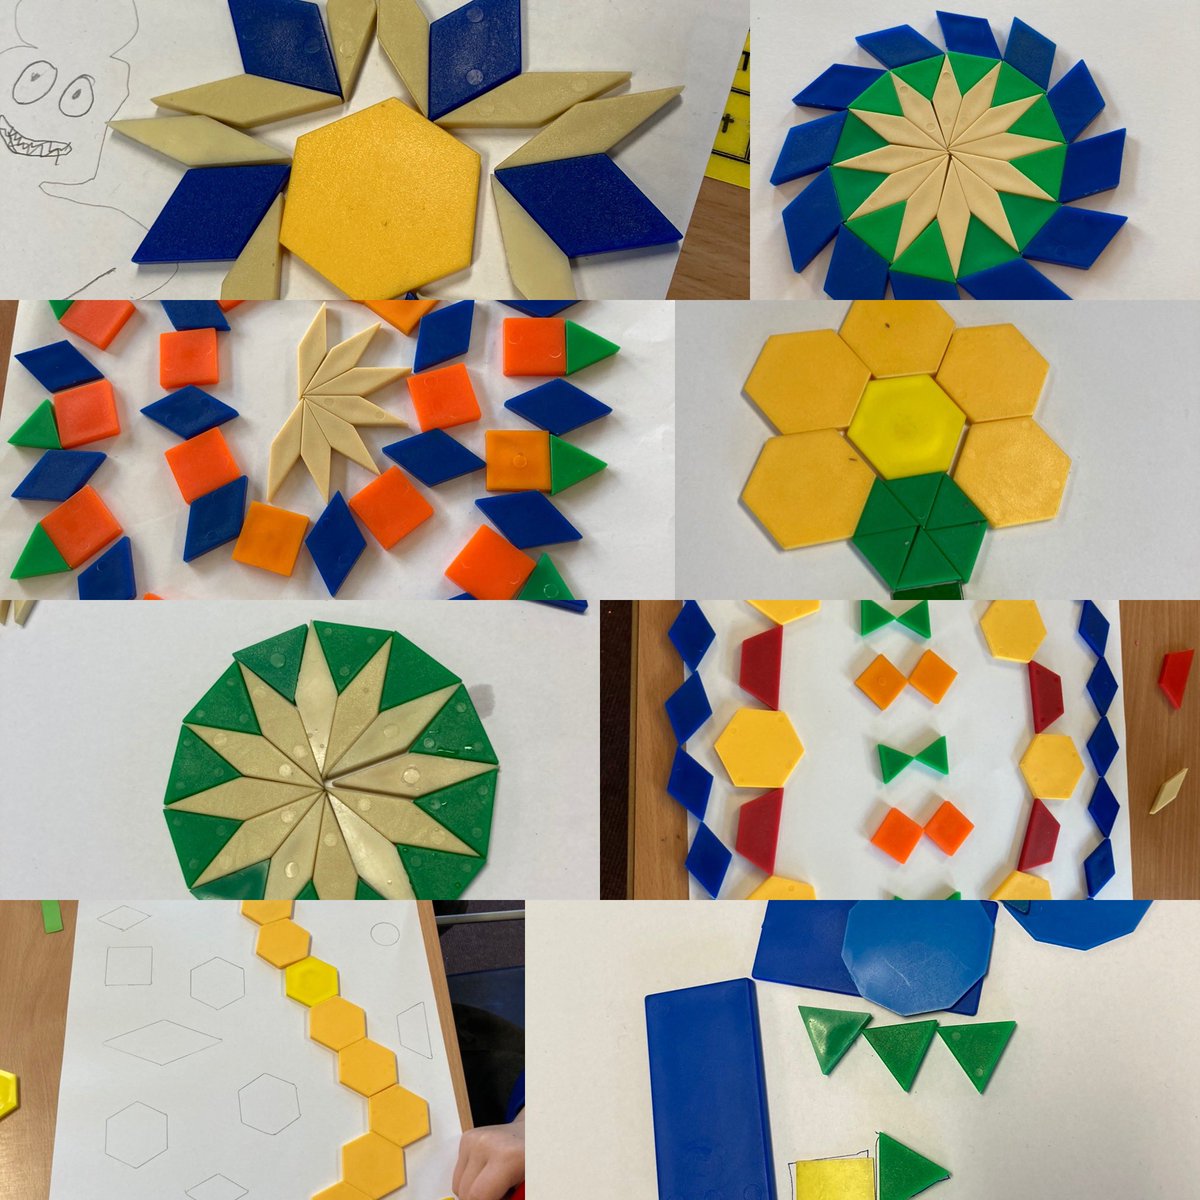 Exploring 2D shapes in 4SW this morning. The children were keen to share their knowledge of corners and sides. They then created some patterns and pictures. #activemaths #childrenleadinglearning #explore #creative